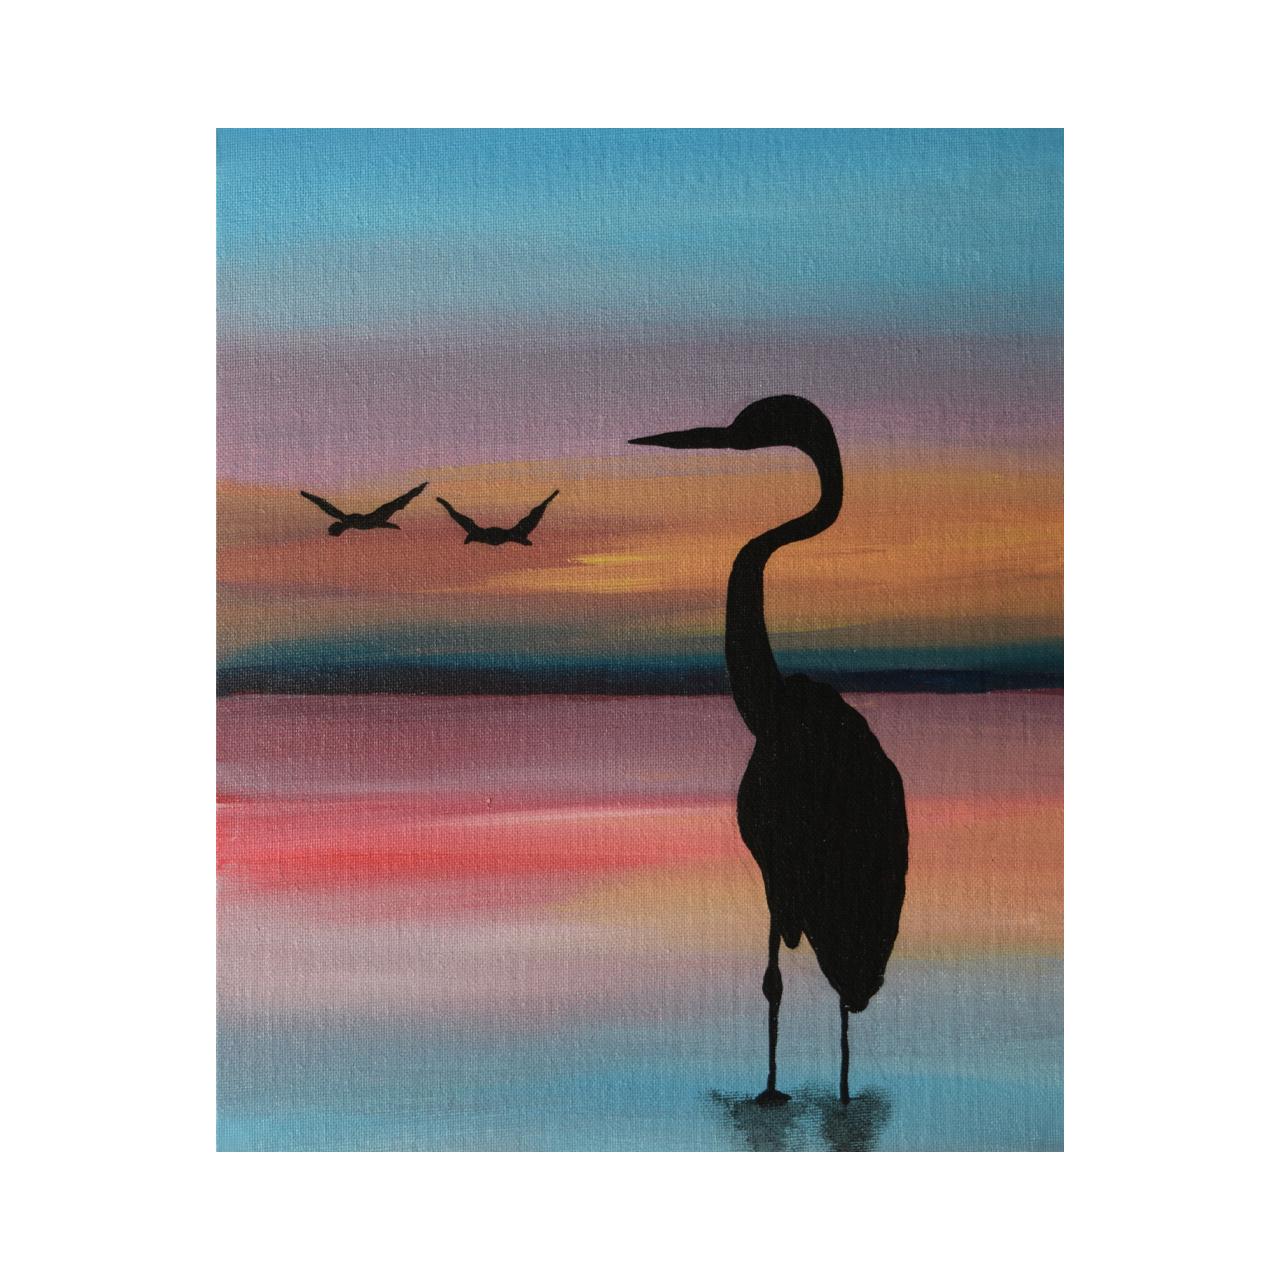 Silhouette crane in sunrise  (~40% OFF LIST PRICE - LIMITED TIME) - Painting by Jay Patel